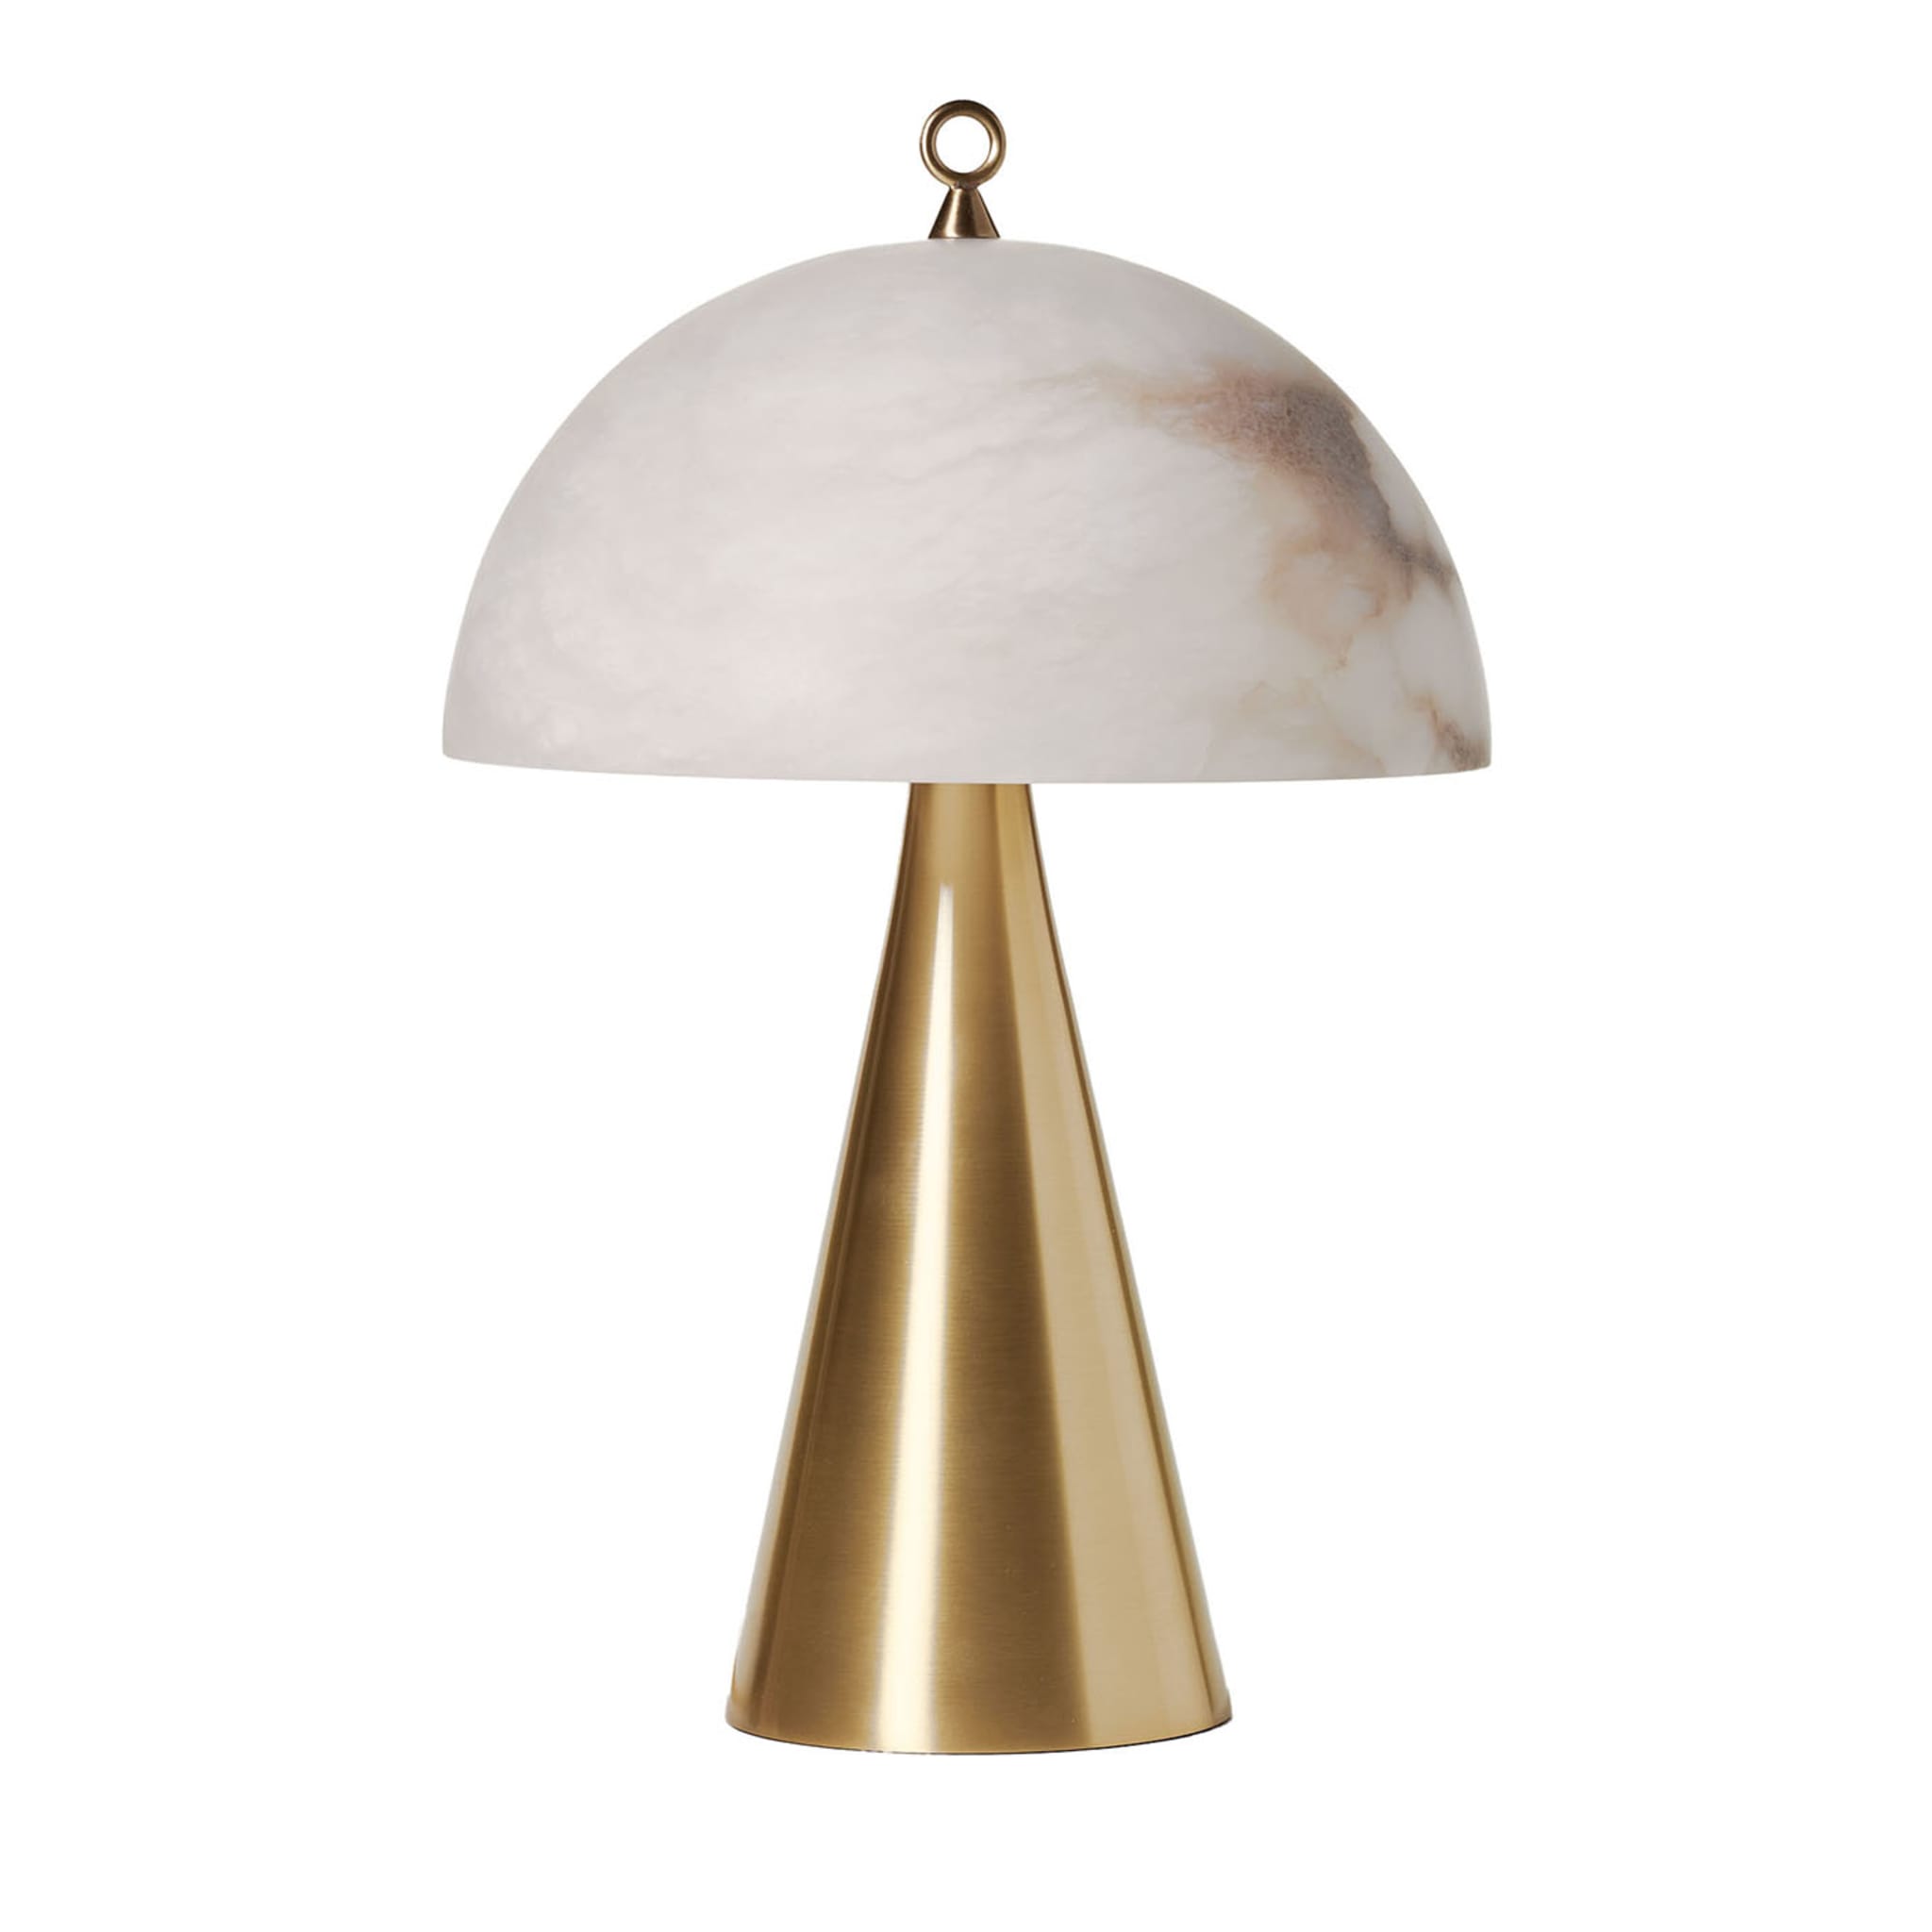 "Fungotto" Table Lamp in Satin Brass and Alabaster - Main view